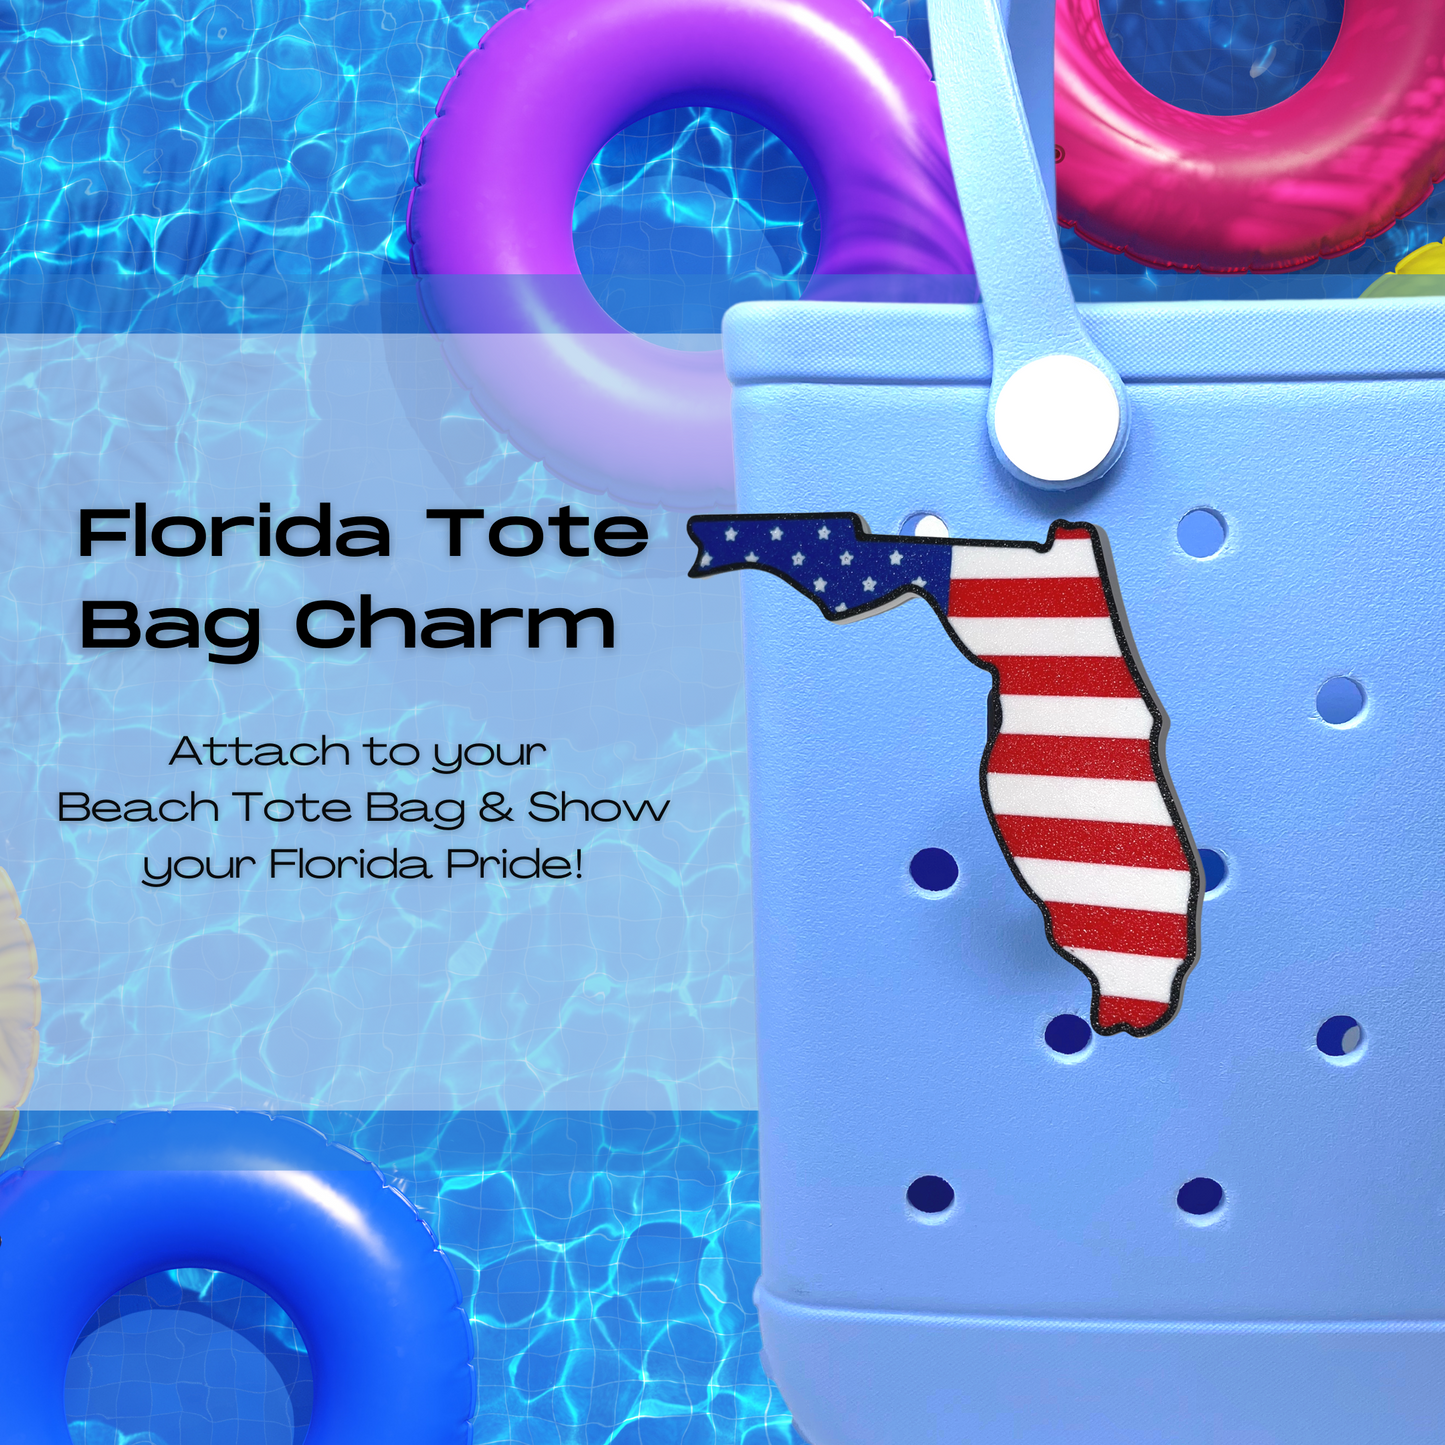 USA Flag Charms - Decorative Charms for Displaying Patriotism - Compatible with Bogg Bags, Simply Southern and other Tote Bags